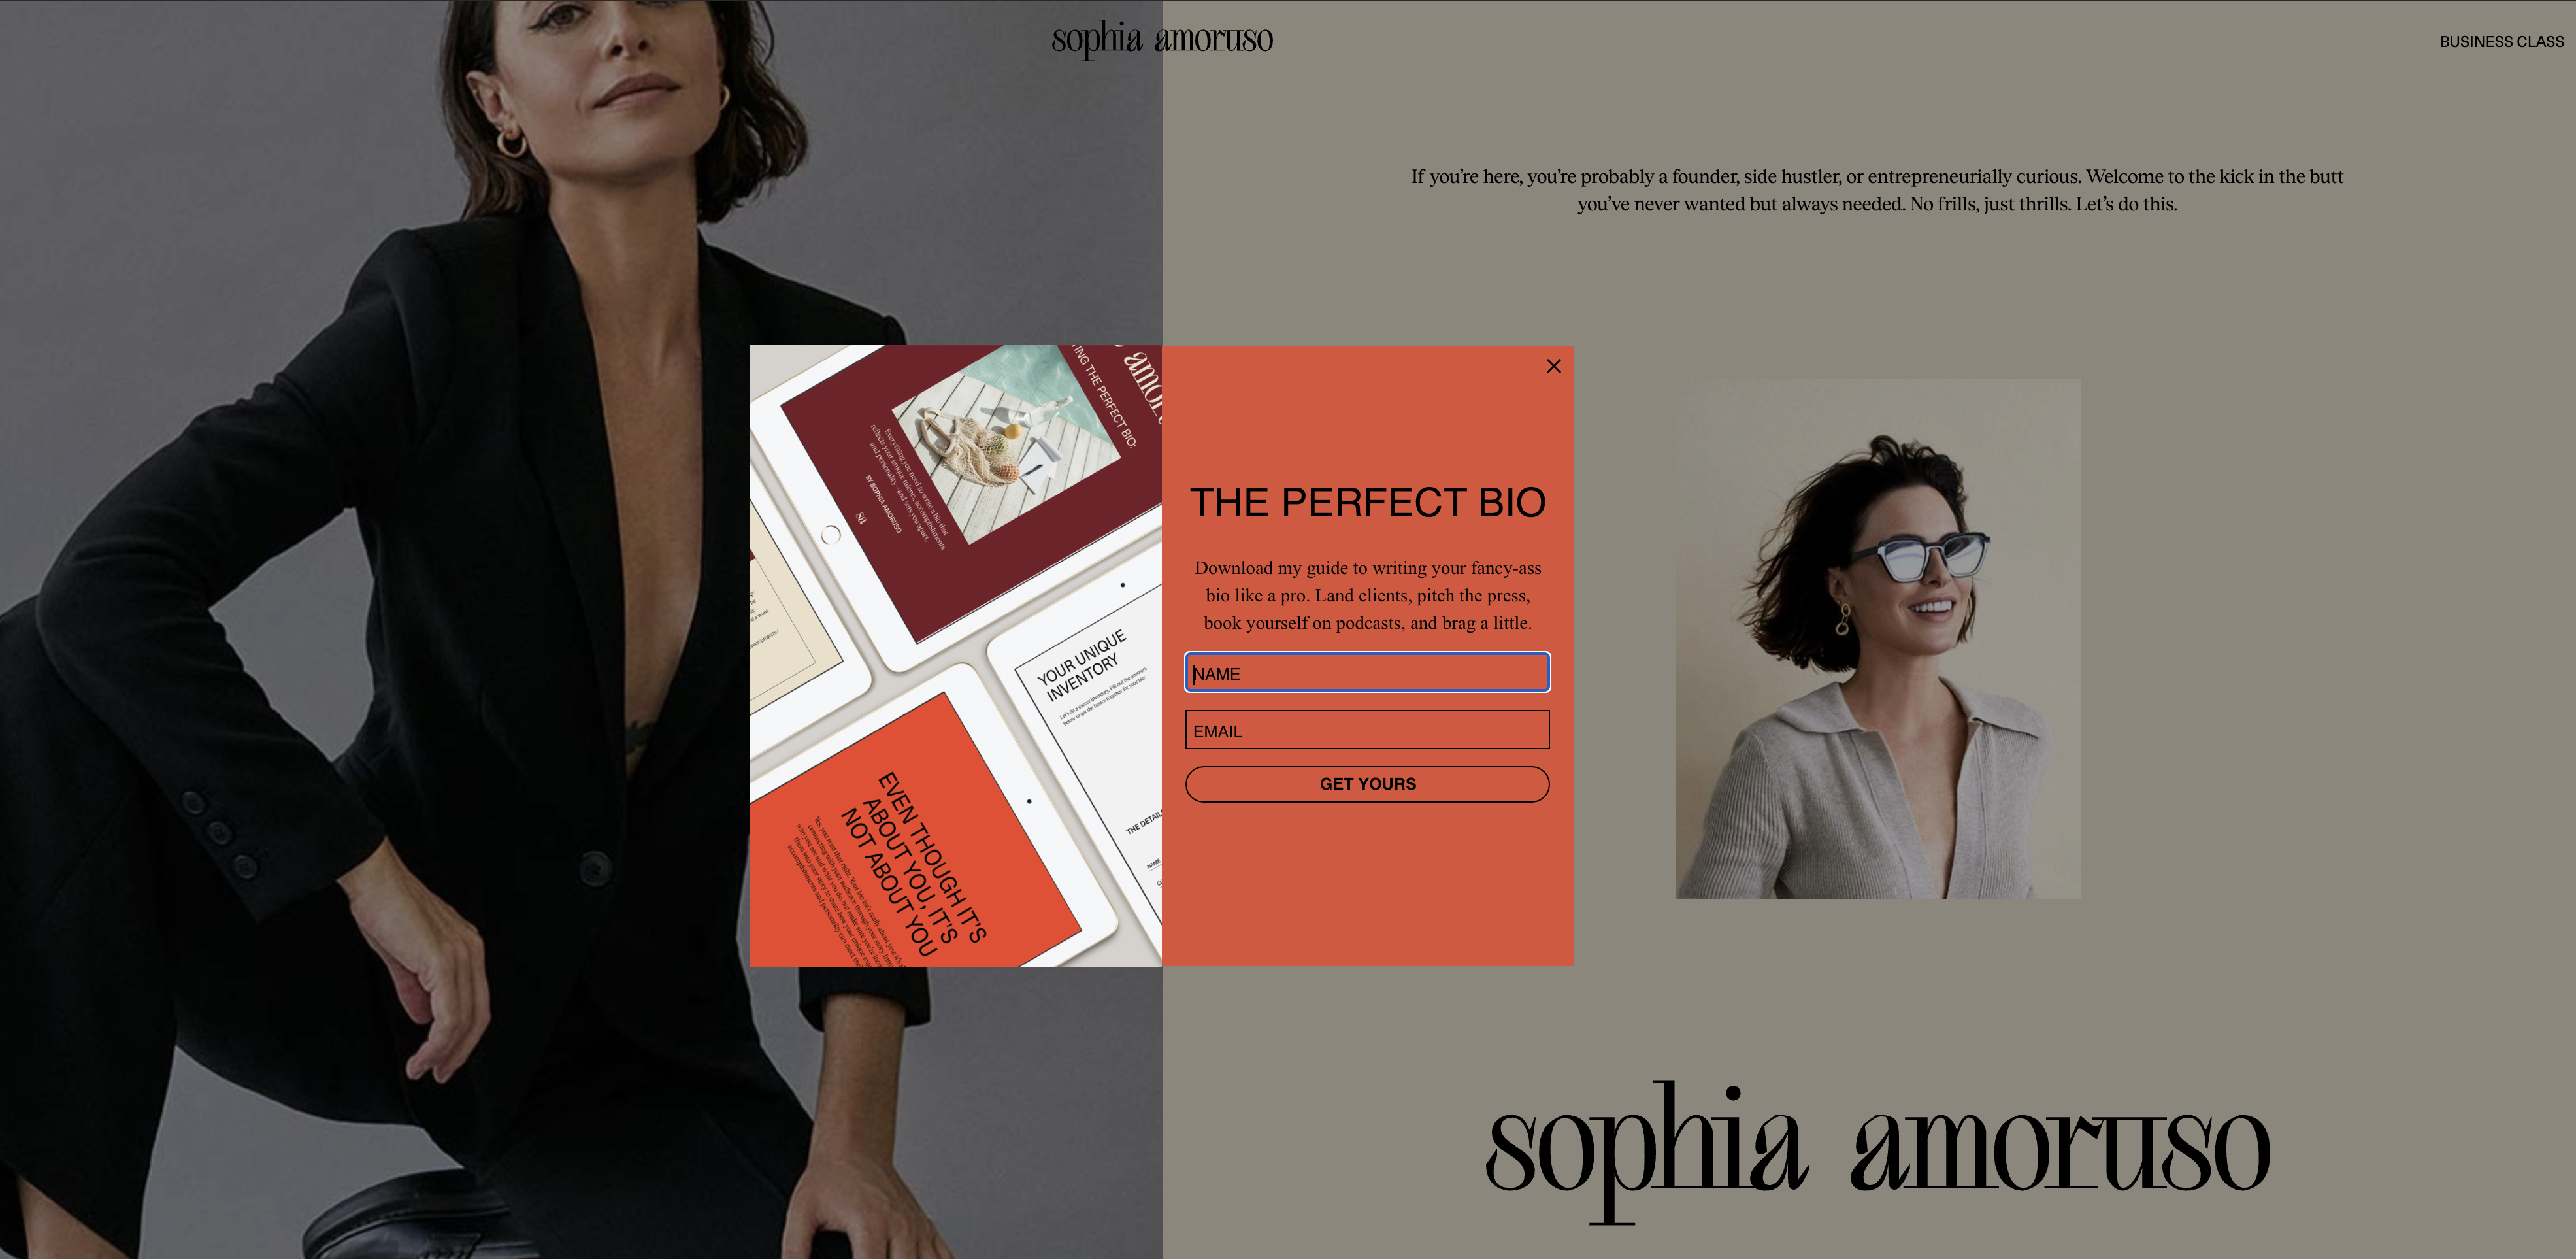 sophie amaruso cta example landing page